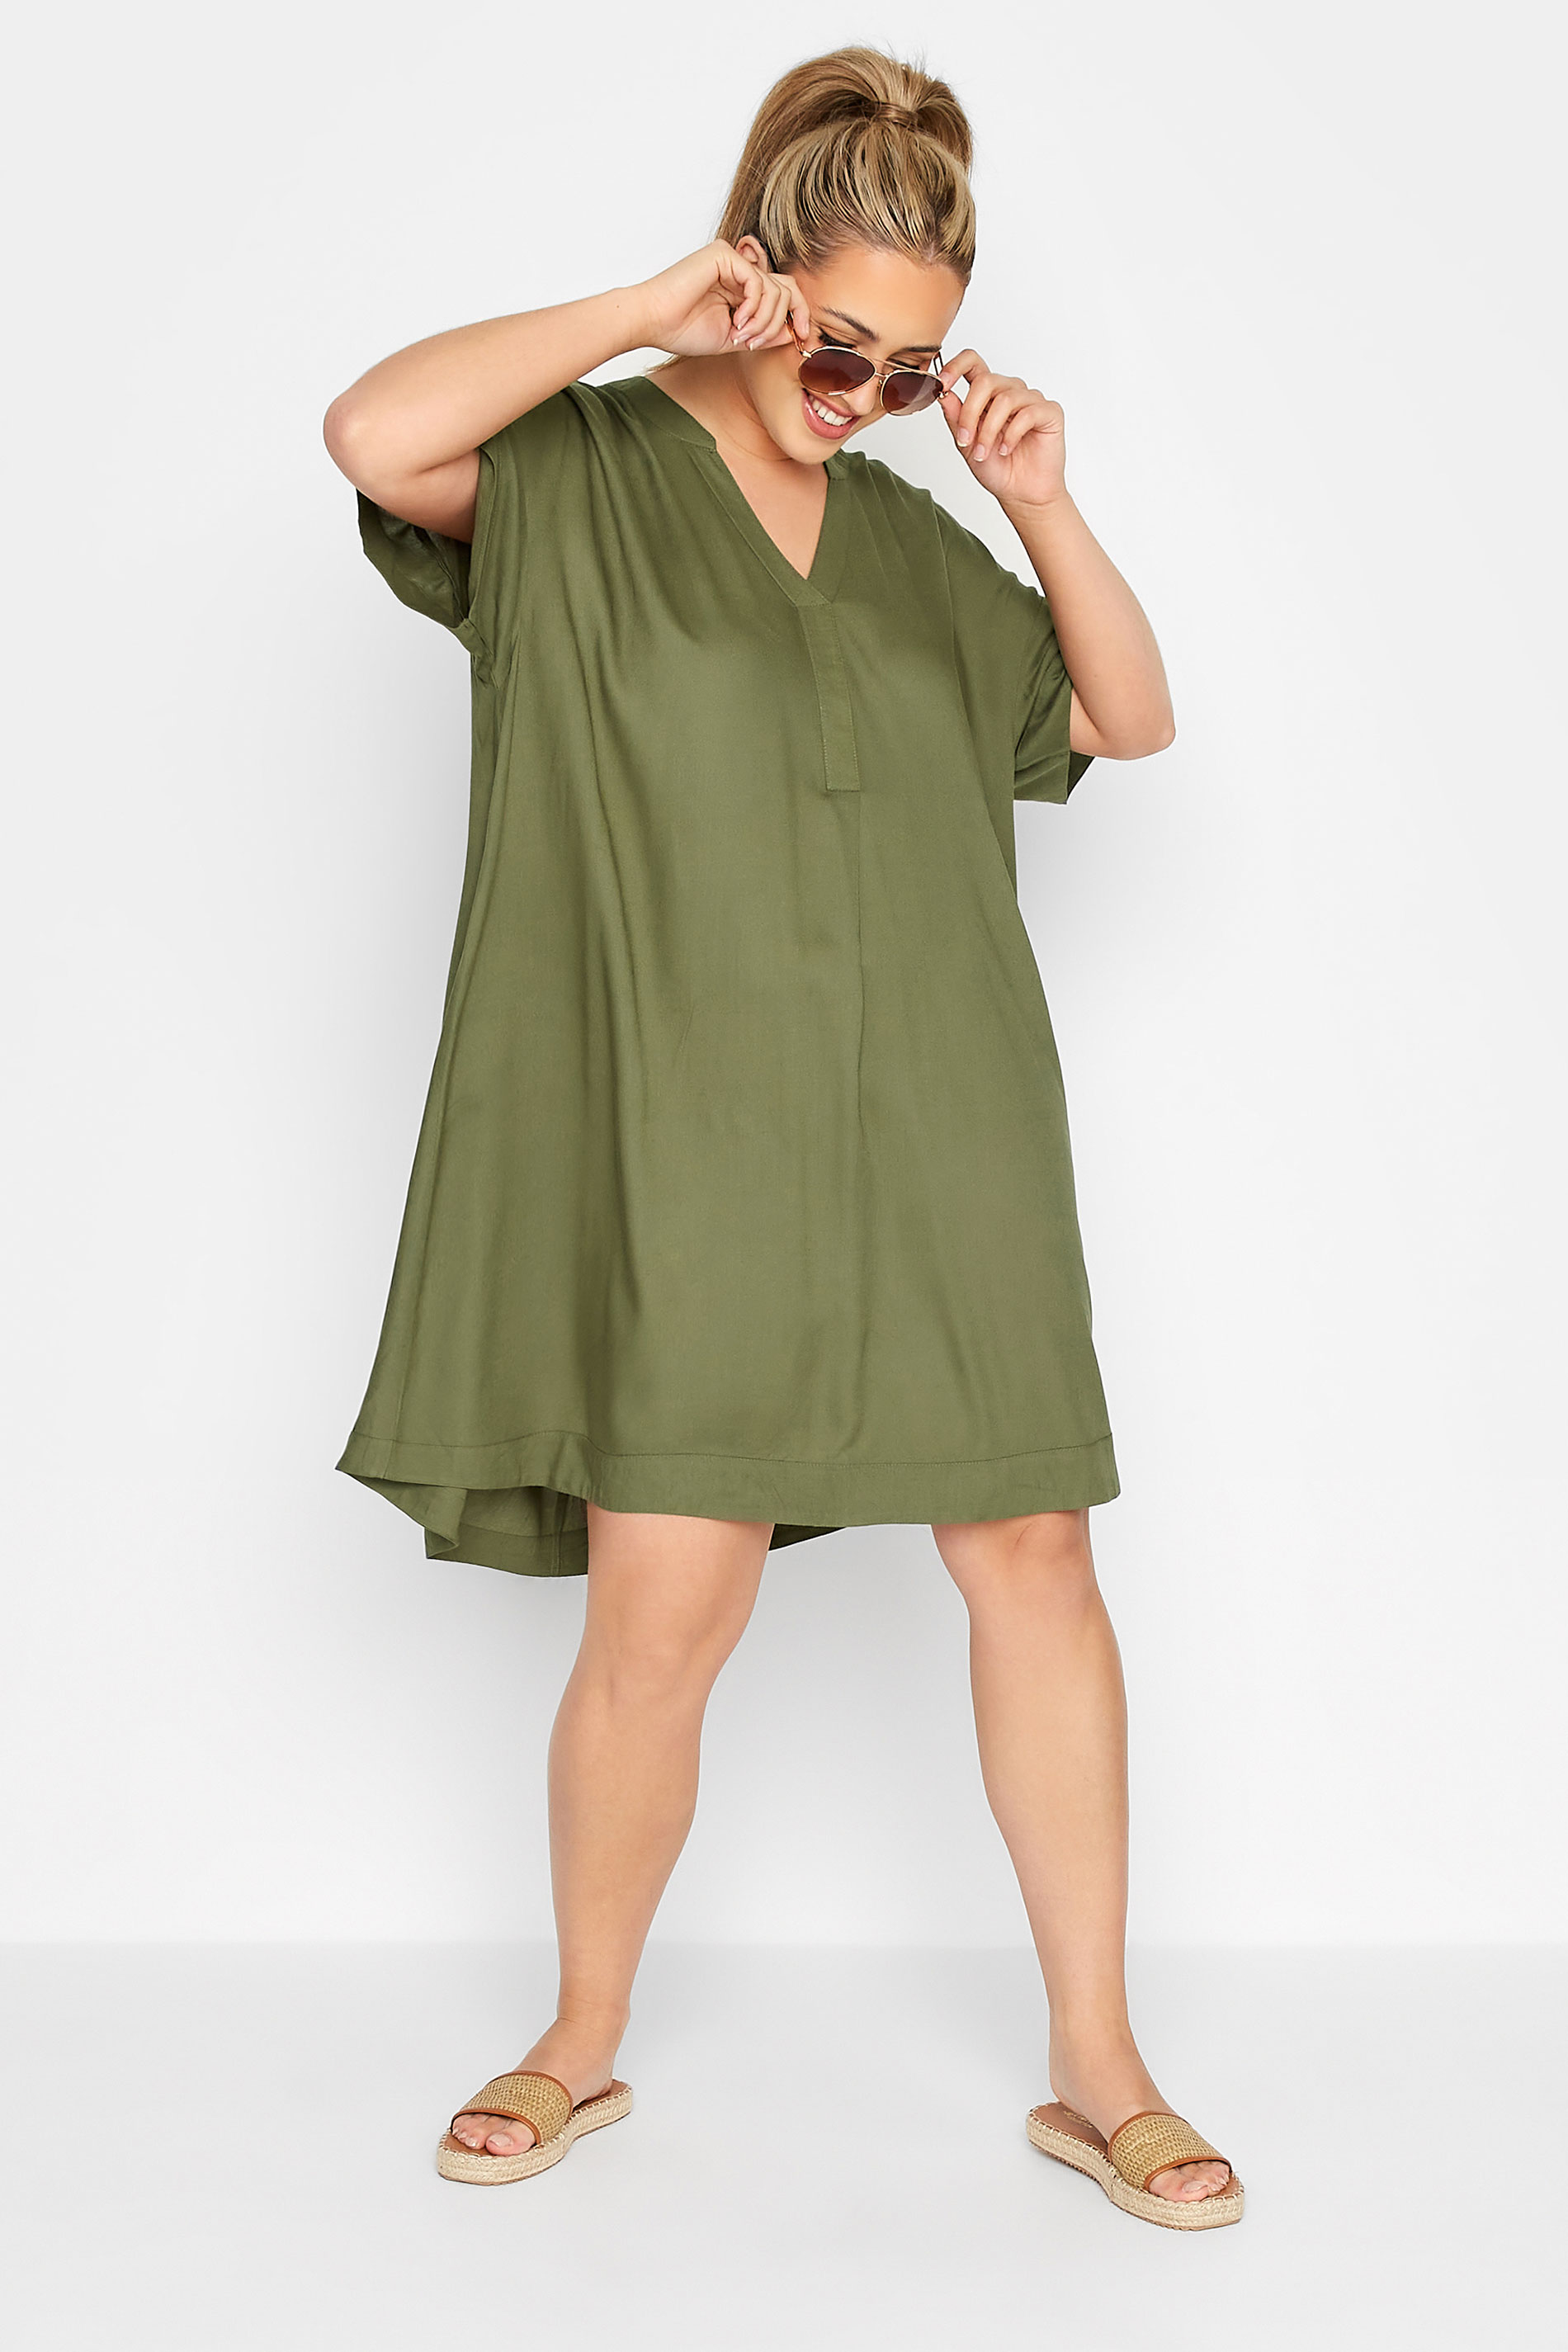 Robes Grande Taille Grande taille  Robes Casual | LIMITED COLLECTION - Robe Verte Kaki Style Chemisier - GU87724